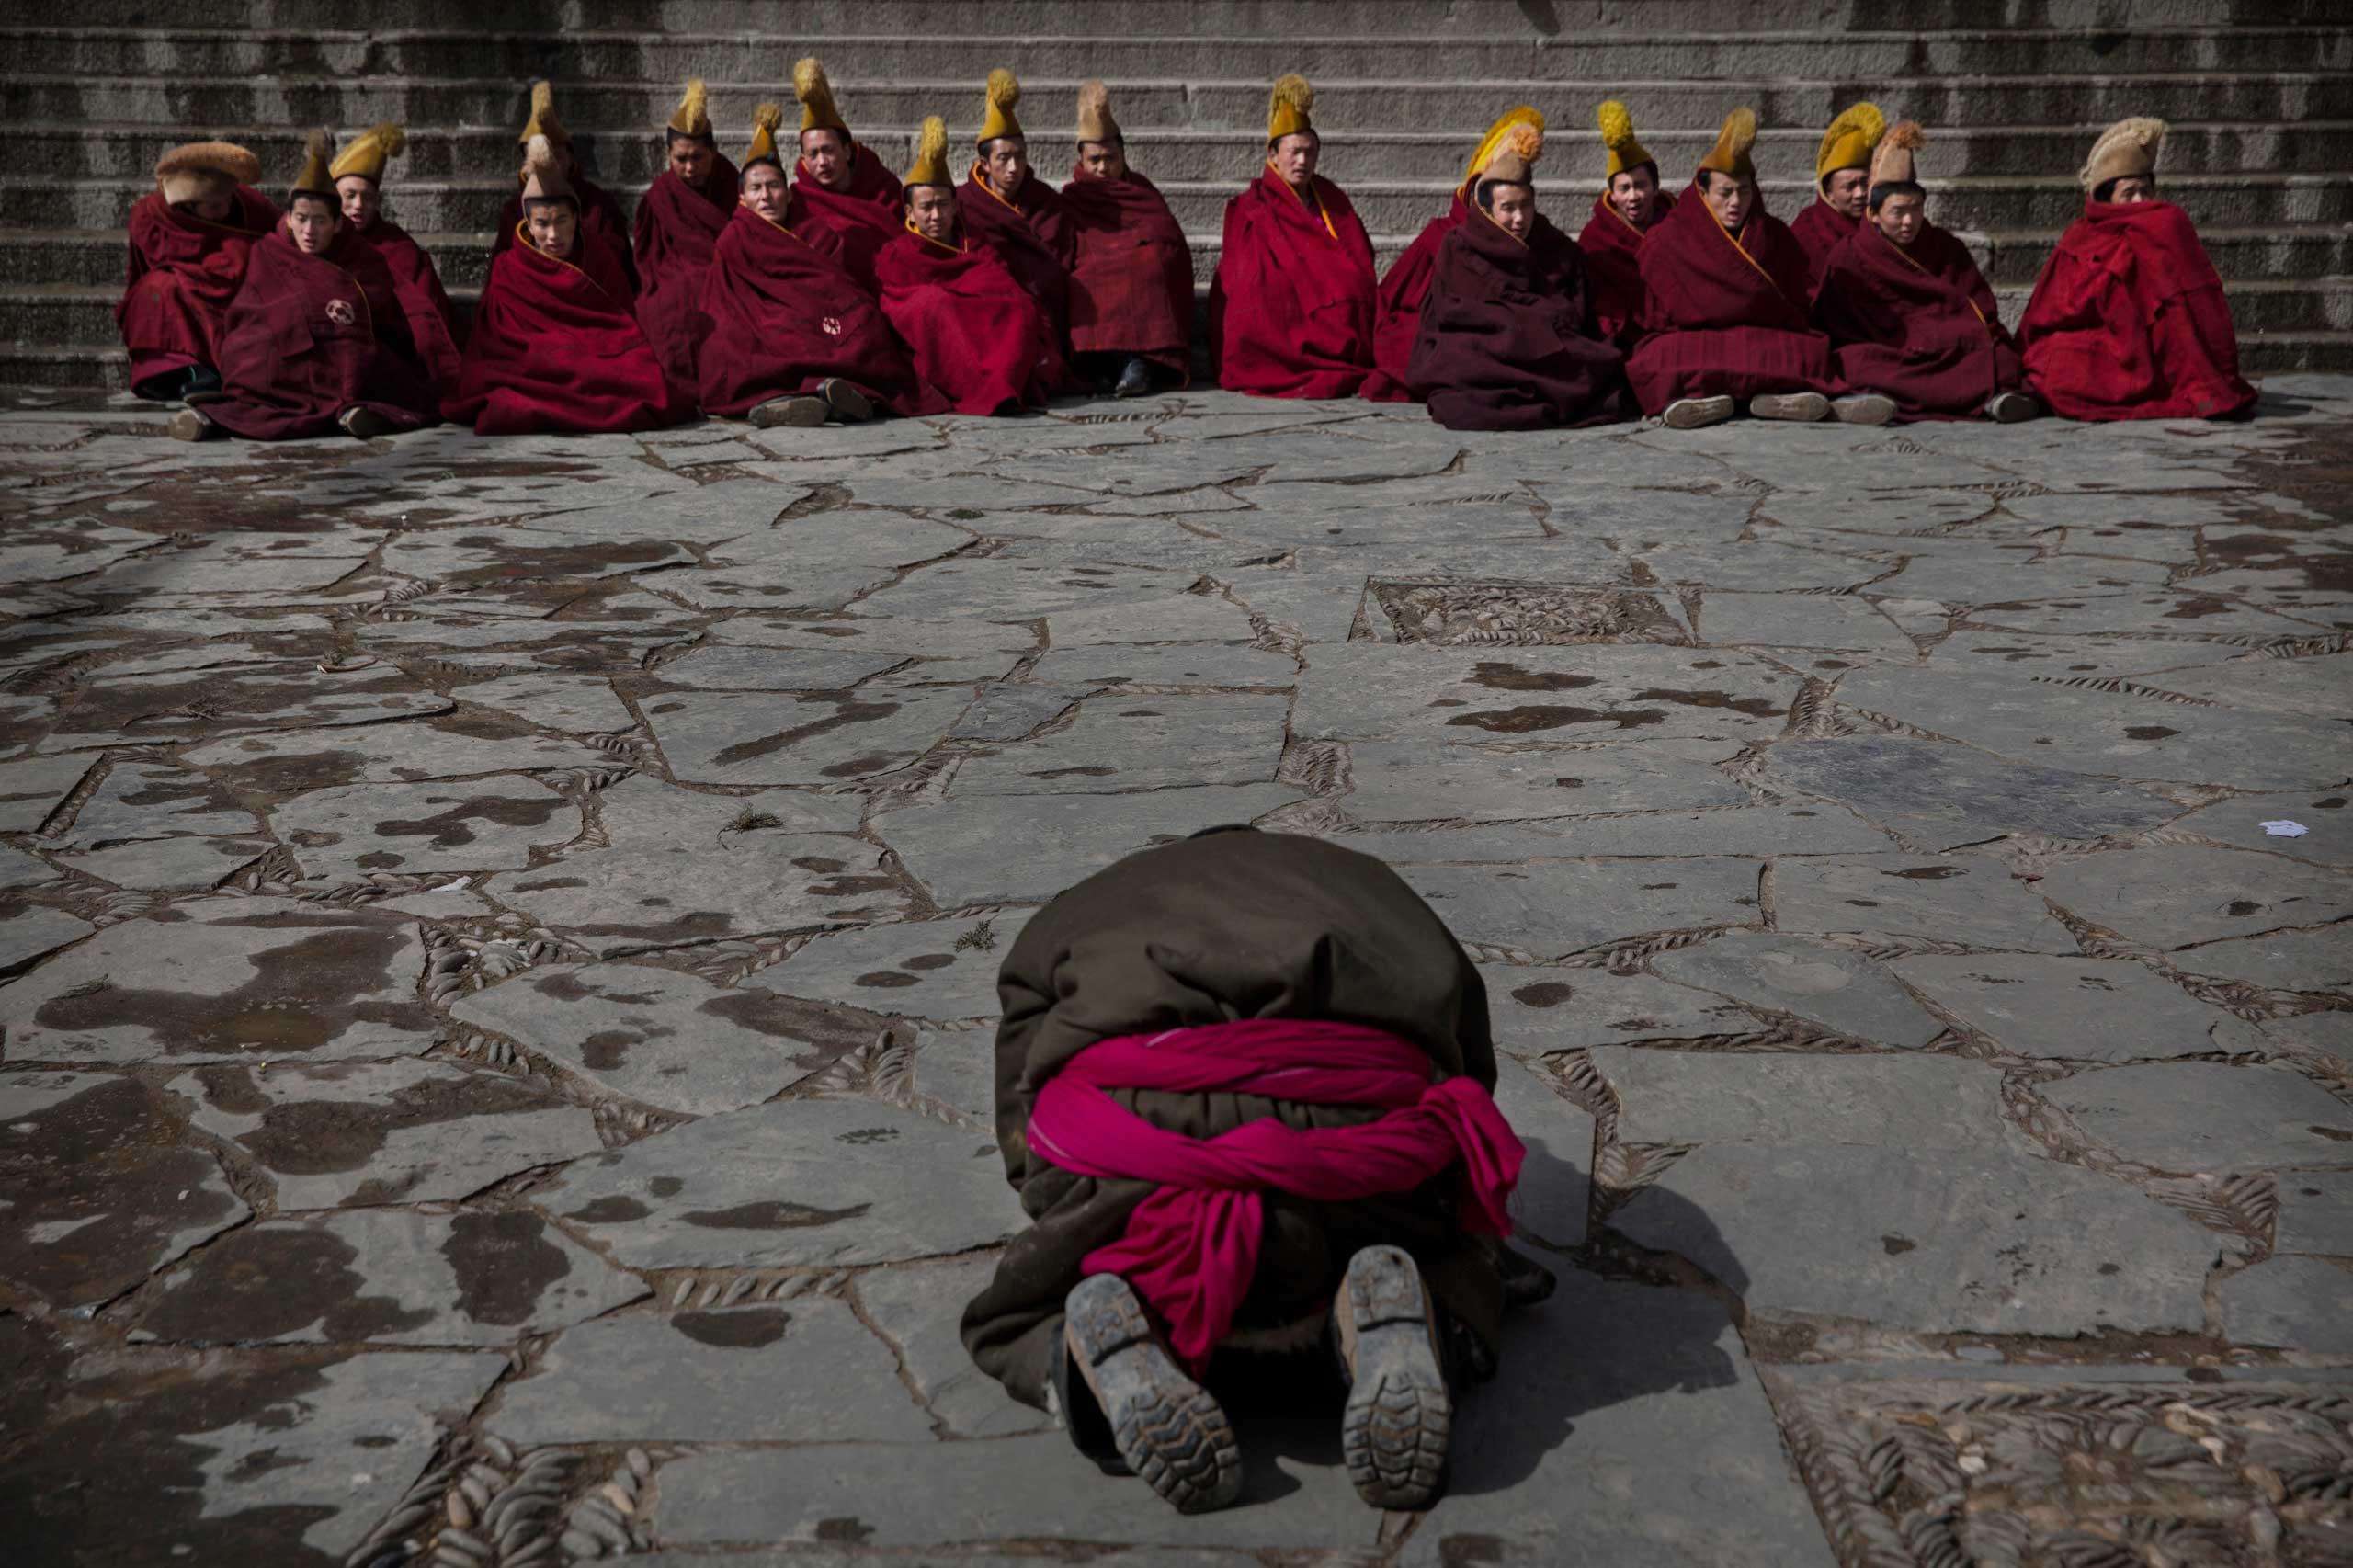 A Tibetan Buddhist man prays towards monks as they sit outside the main temple  during Monlam or the Great Prayer ritualsat the Labrang Monastery, Xiahe County, Amdo, Tibetan Autonomous Prefecture, Gansu Province, China, March 5, 2015.